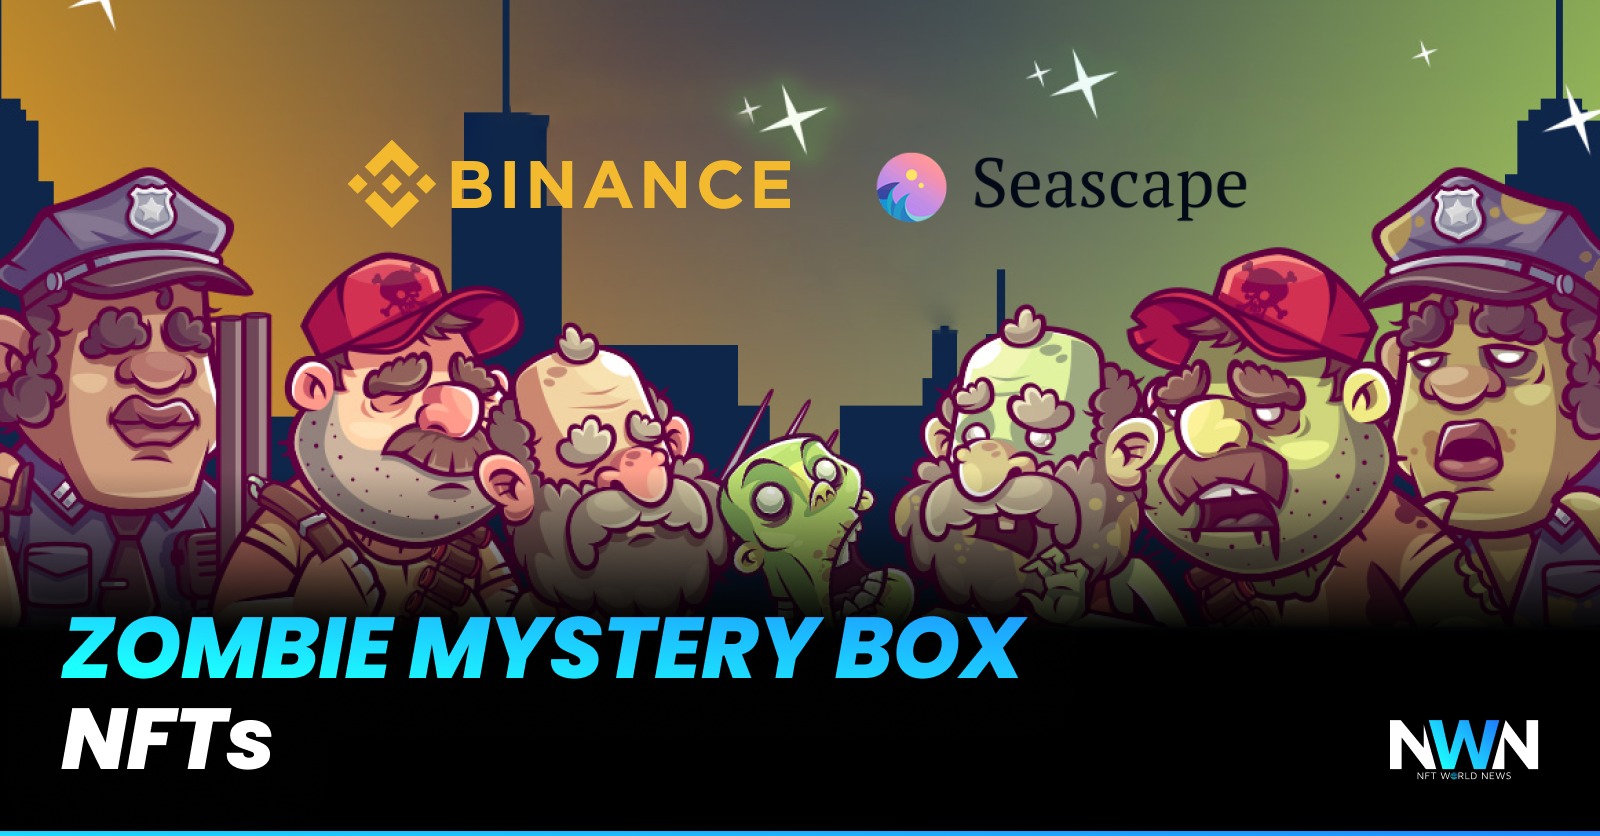 New Zombie Mystery Box NFTs have been released by Seascape and Binance